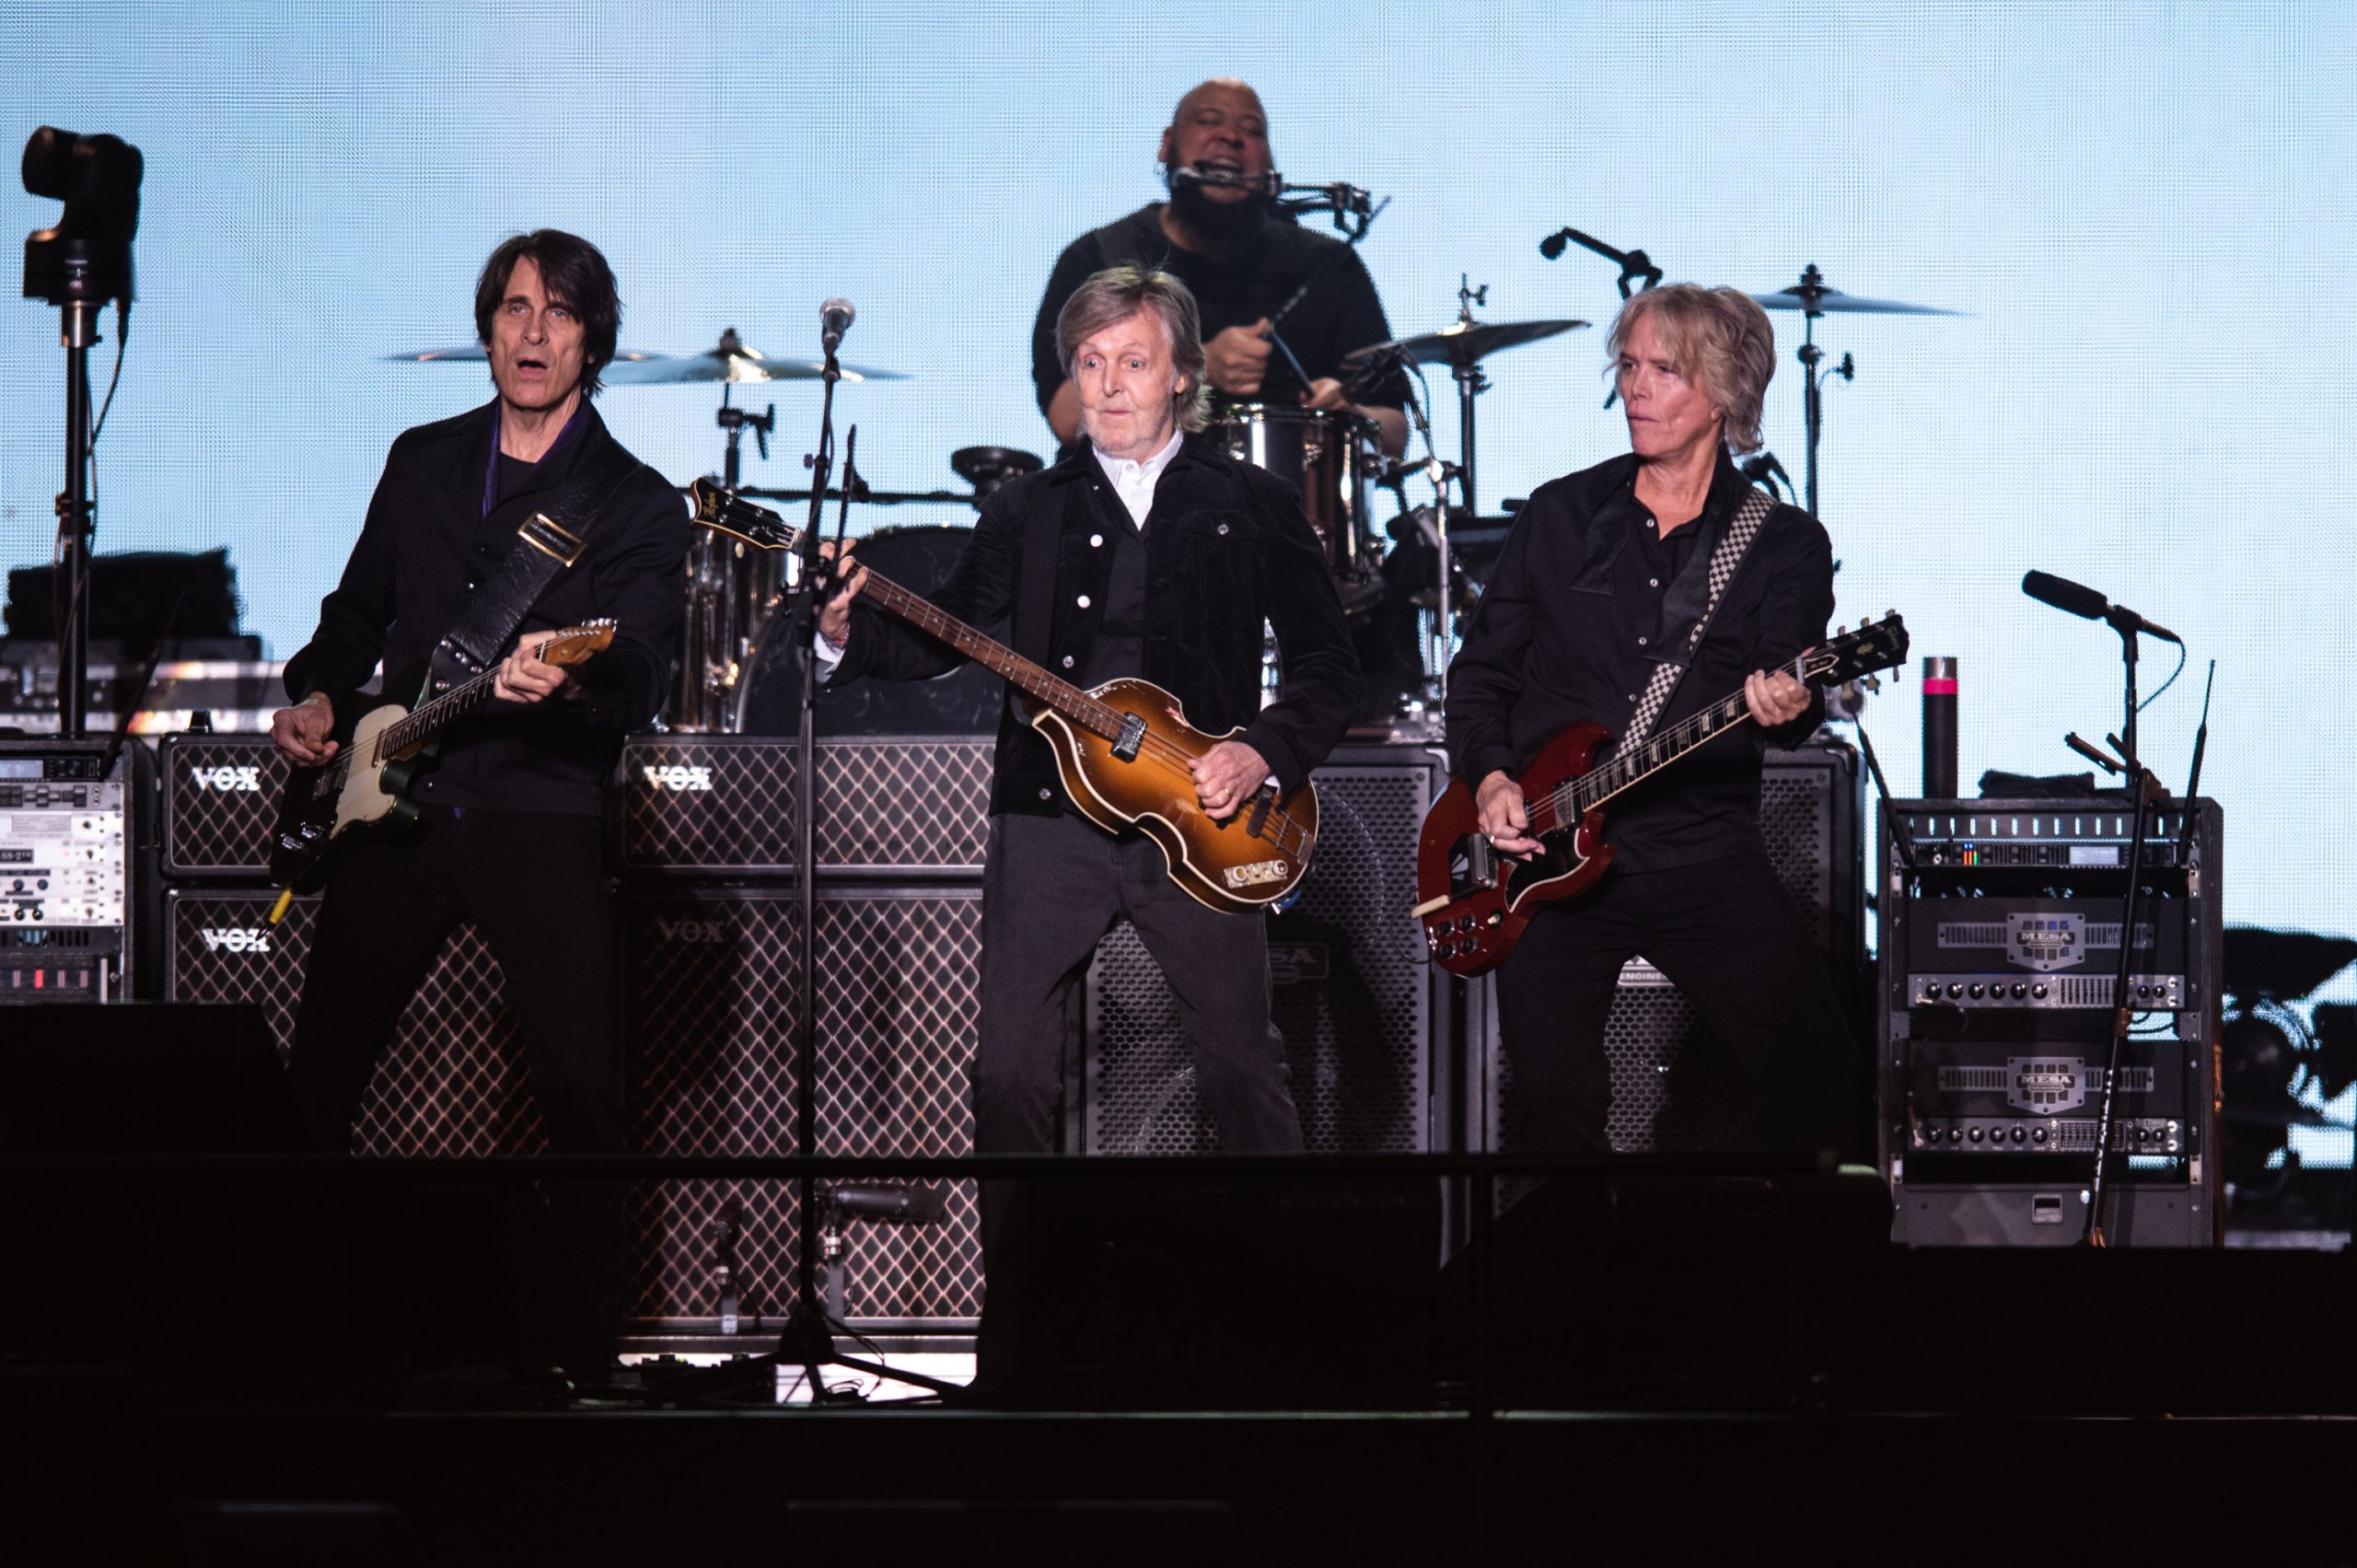 Paul McCartney, flanked by guitarists Rusty Anderson, left, and Brian Ray, performs at the JMA Wireless Dome in Syracuse, NY on June 4, 2022. McCartney played in Syracuse as part of a 13-city North American tour.